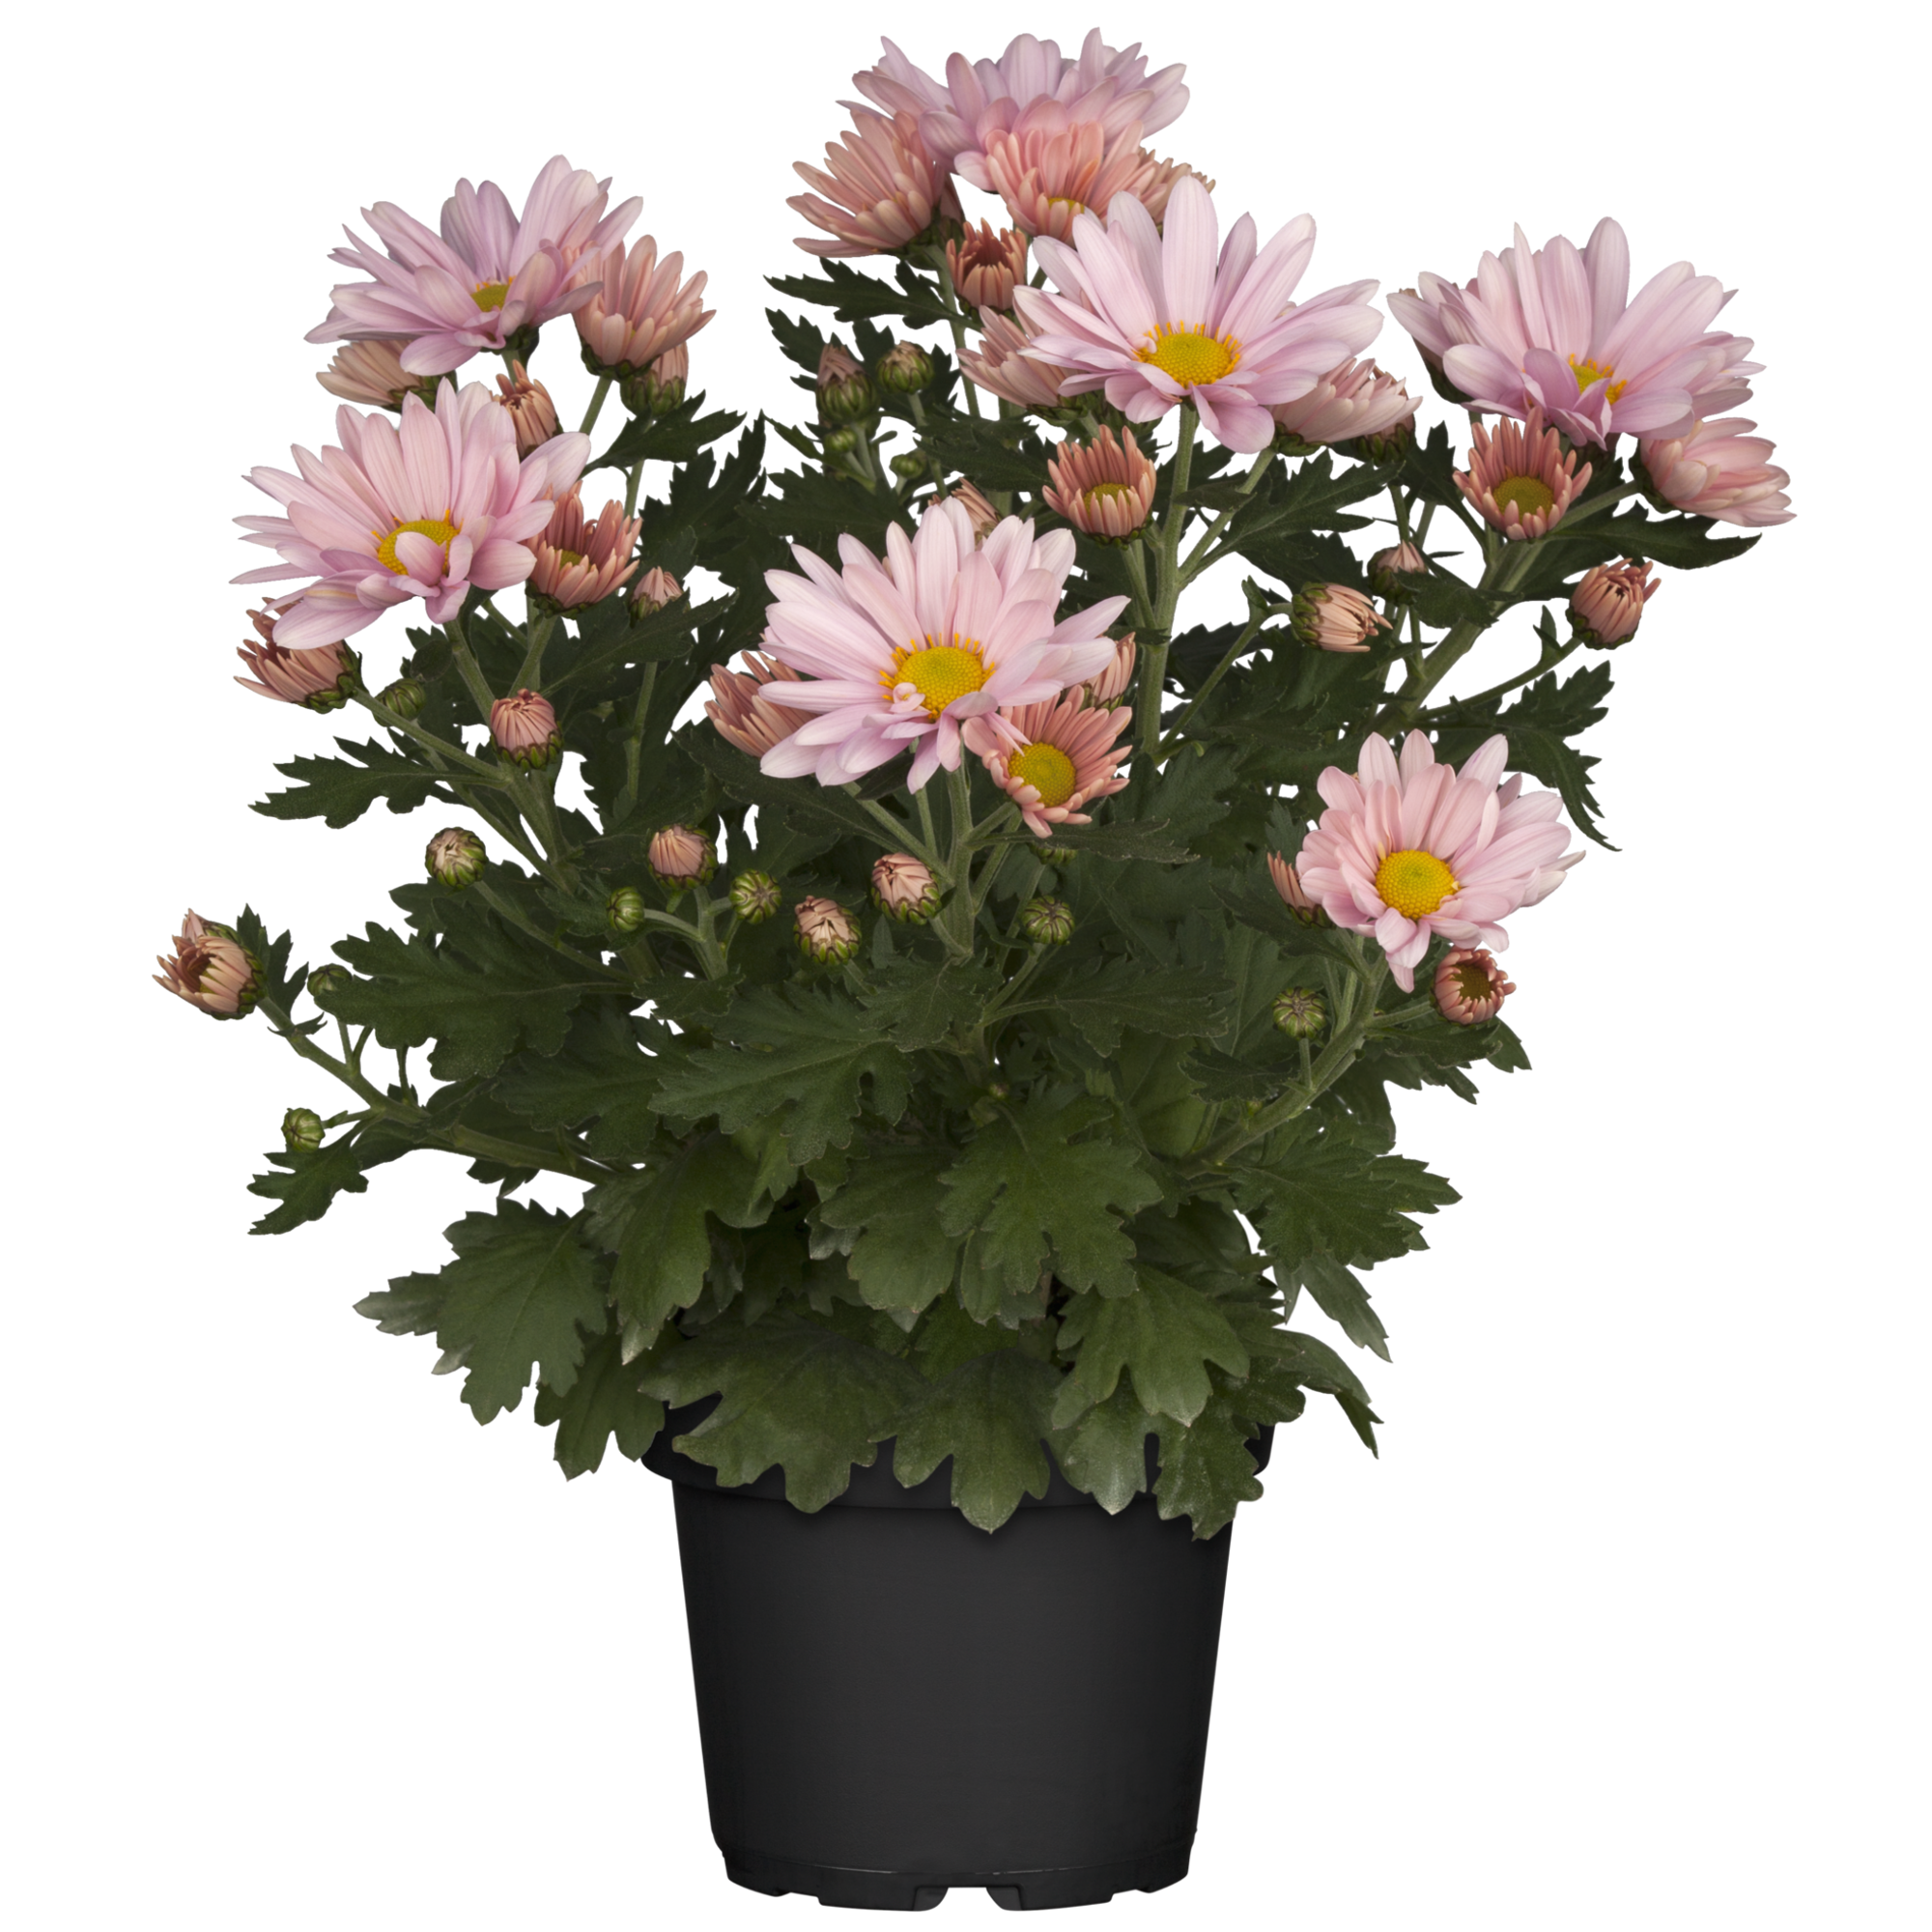 Bauernchrysantheme rosa 12 cm Topf, 2er-Set + product picture